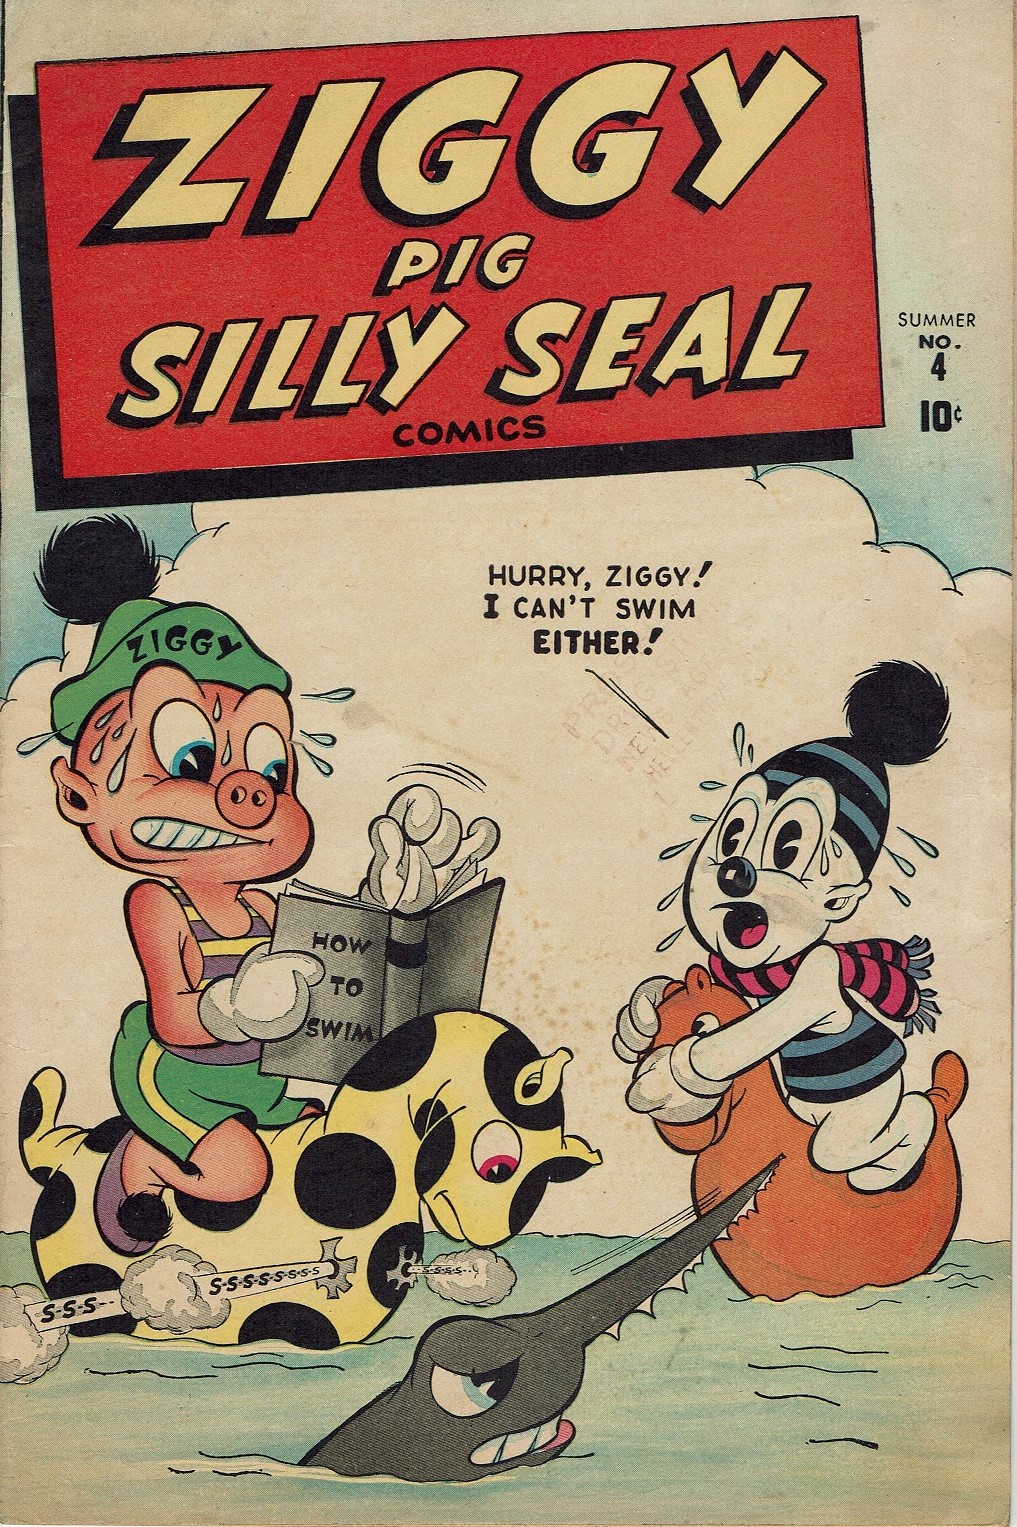 Ziggy Pig-Silly Seal Comics (1944) issue 4 - Page 1